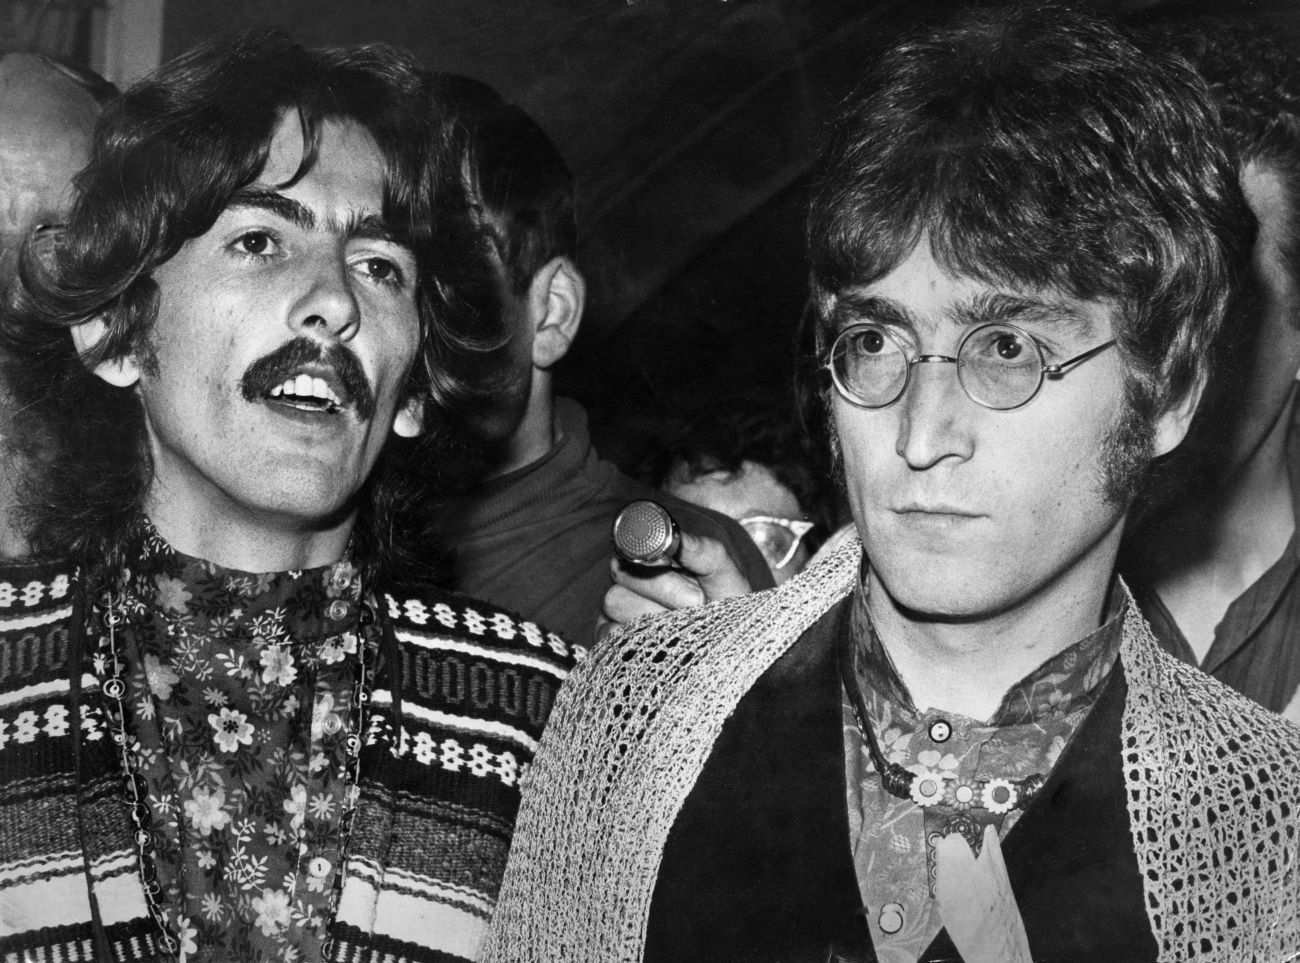 A black and white picture of George Harrison and John Lennon walking through a crowd together.